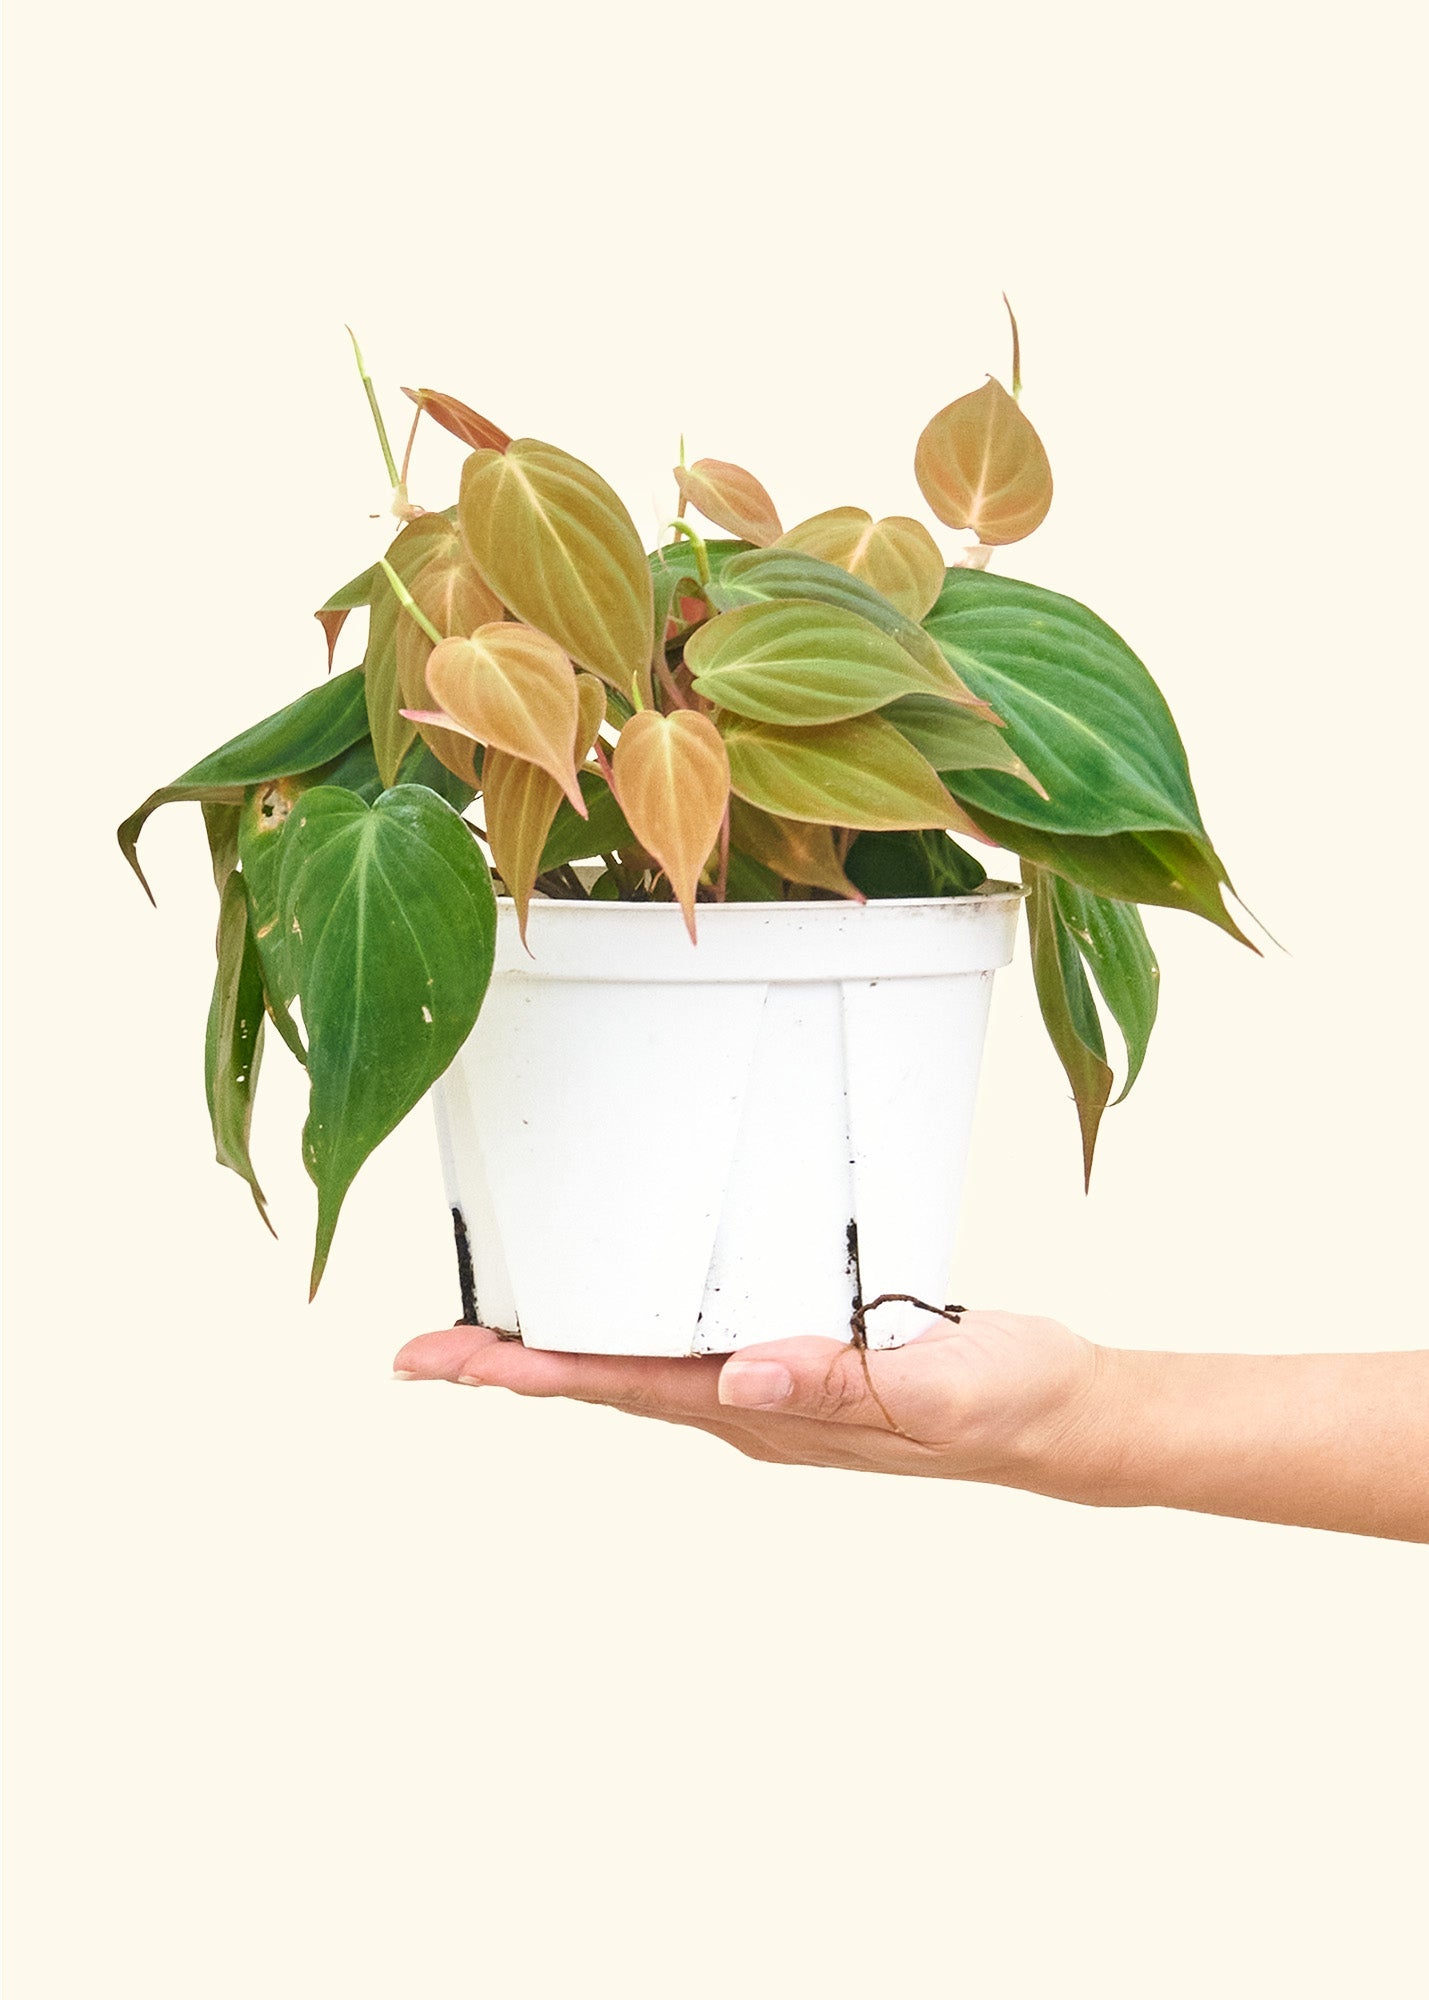 Medium Velvet Leaf Philodendron (Philodendron micans)